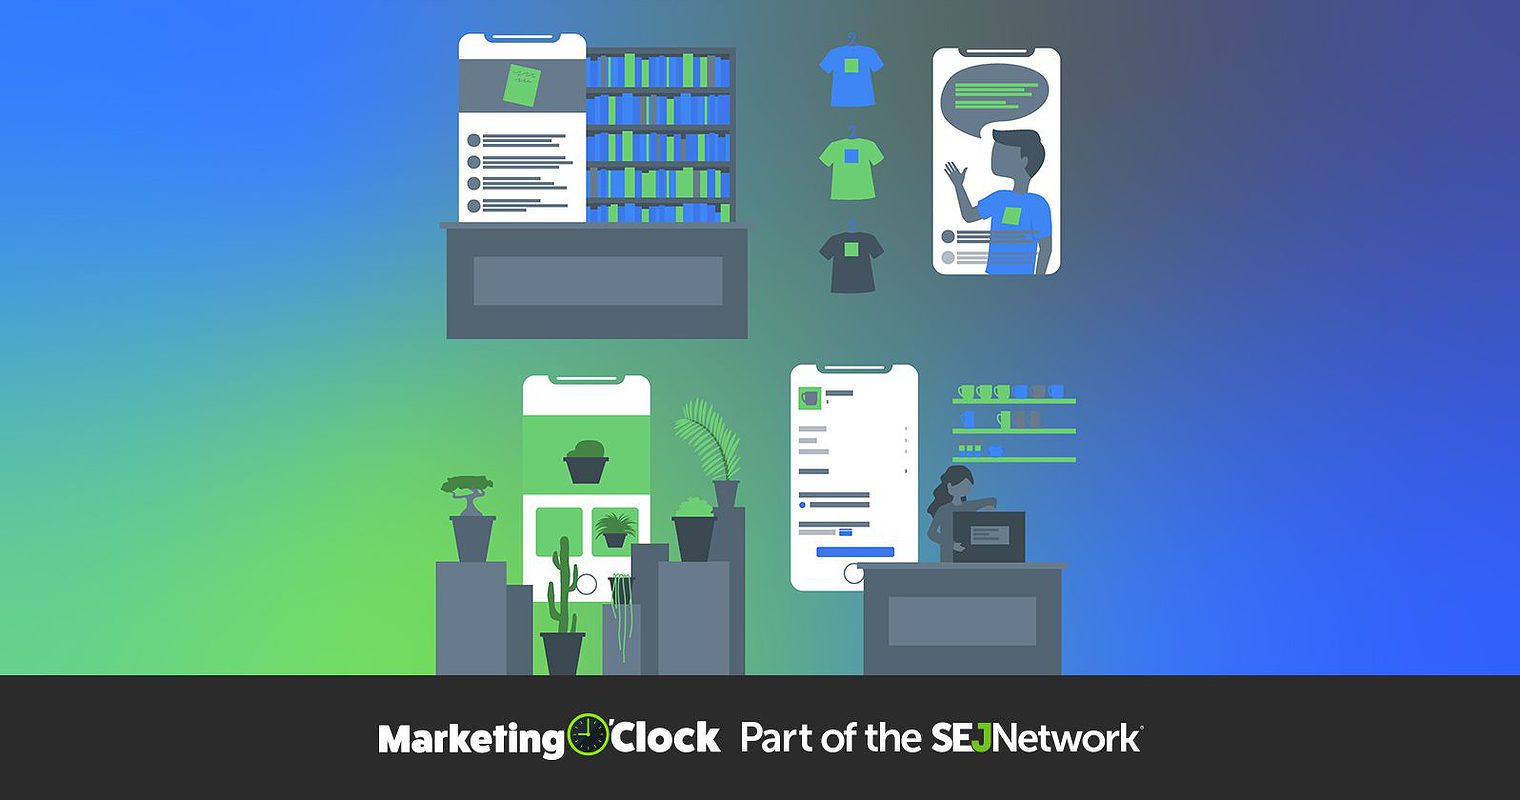 Facebook Shops for Small Businesses & This Week’s Digital Marketing News [PODCAST]